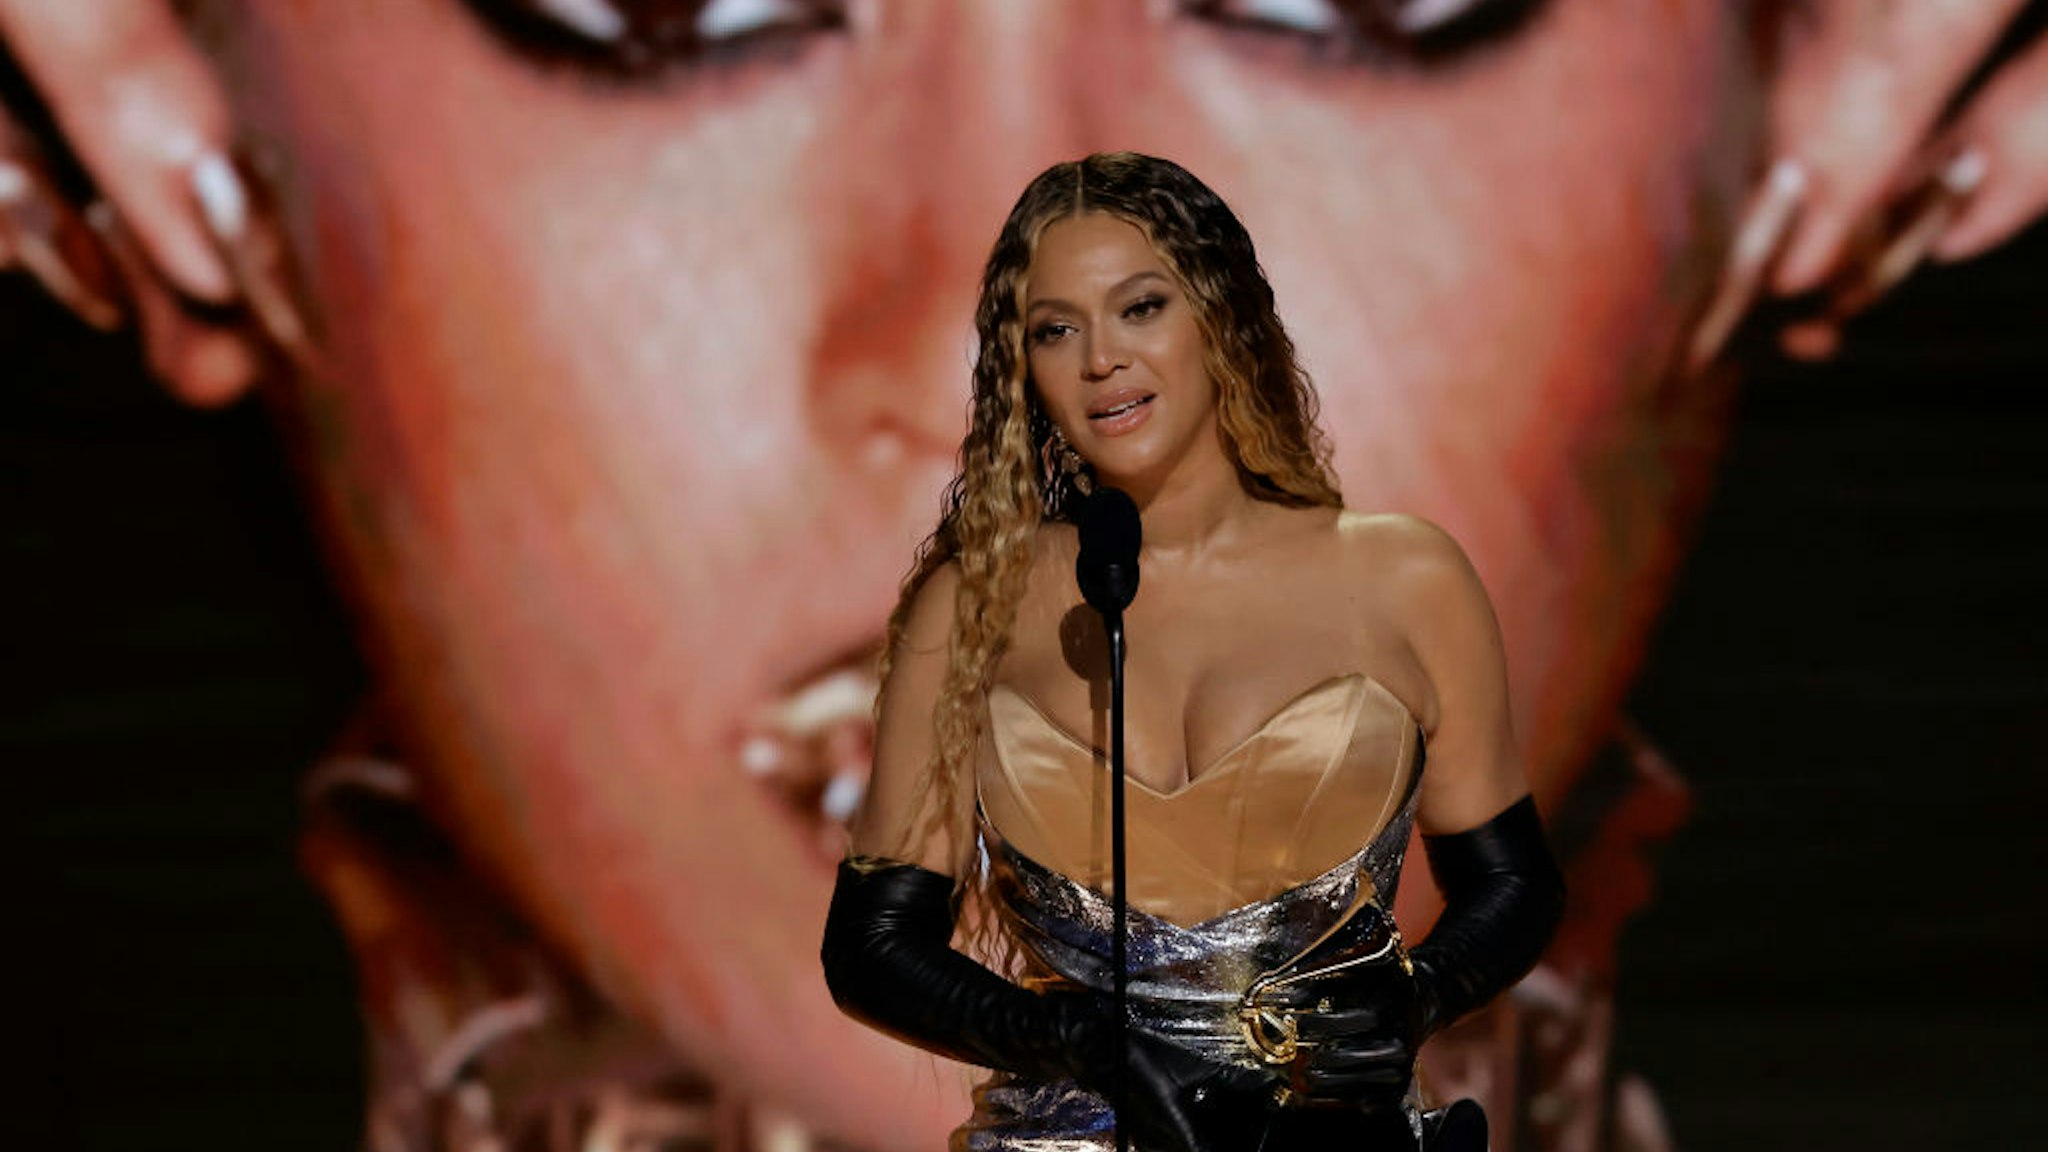 LOS ANGELES, CALIFORNIA - FEBRUARY 05: Beyoncé accepts the Best Dance/Electronic Music Album award for “Renaissance” onstage during the 65th GRAMMY Awards at Crypto.com Arena on February 05, 2023 in Los Angeles, California. (Photo by Kevin Winter/Getty Images for The Recording Academy)